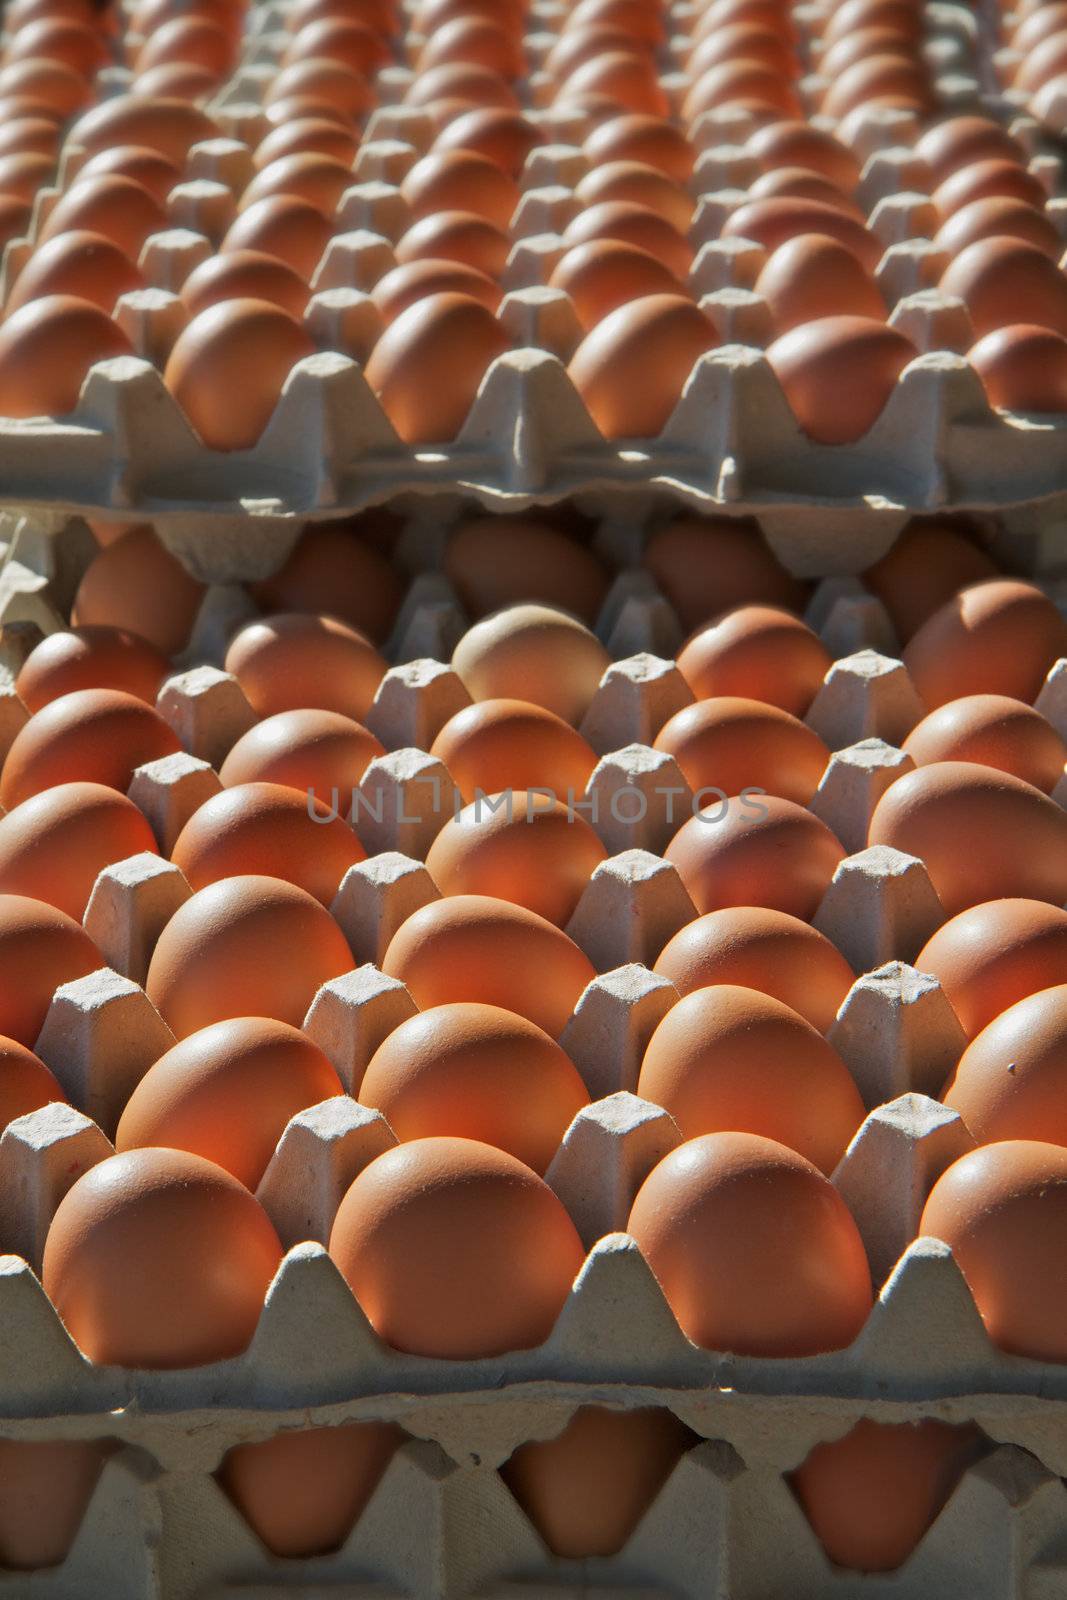 Stacks of dozens of brown eggs at the farmers market